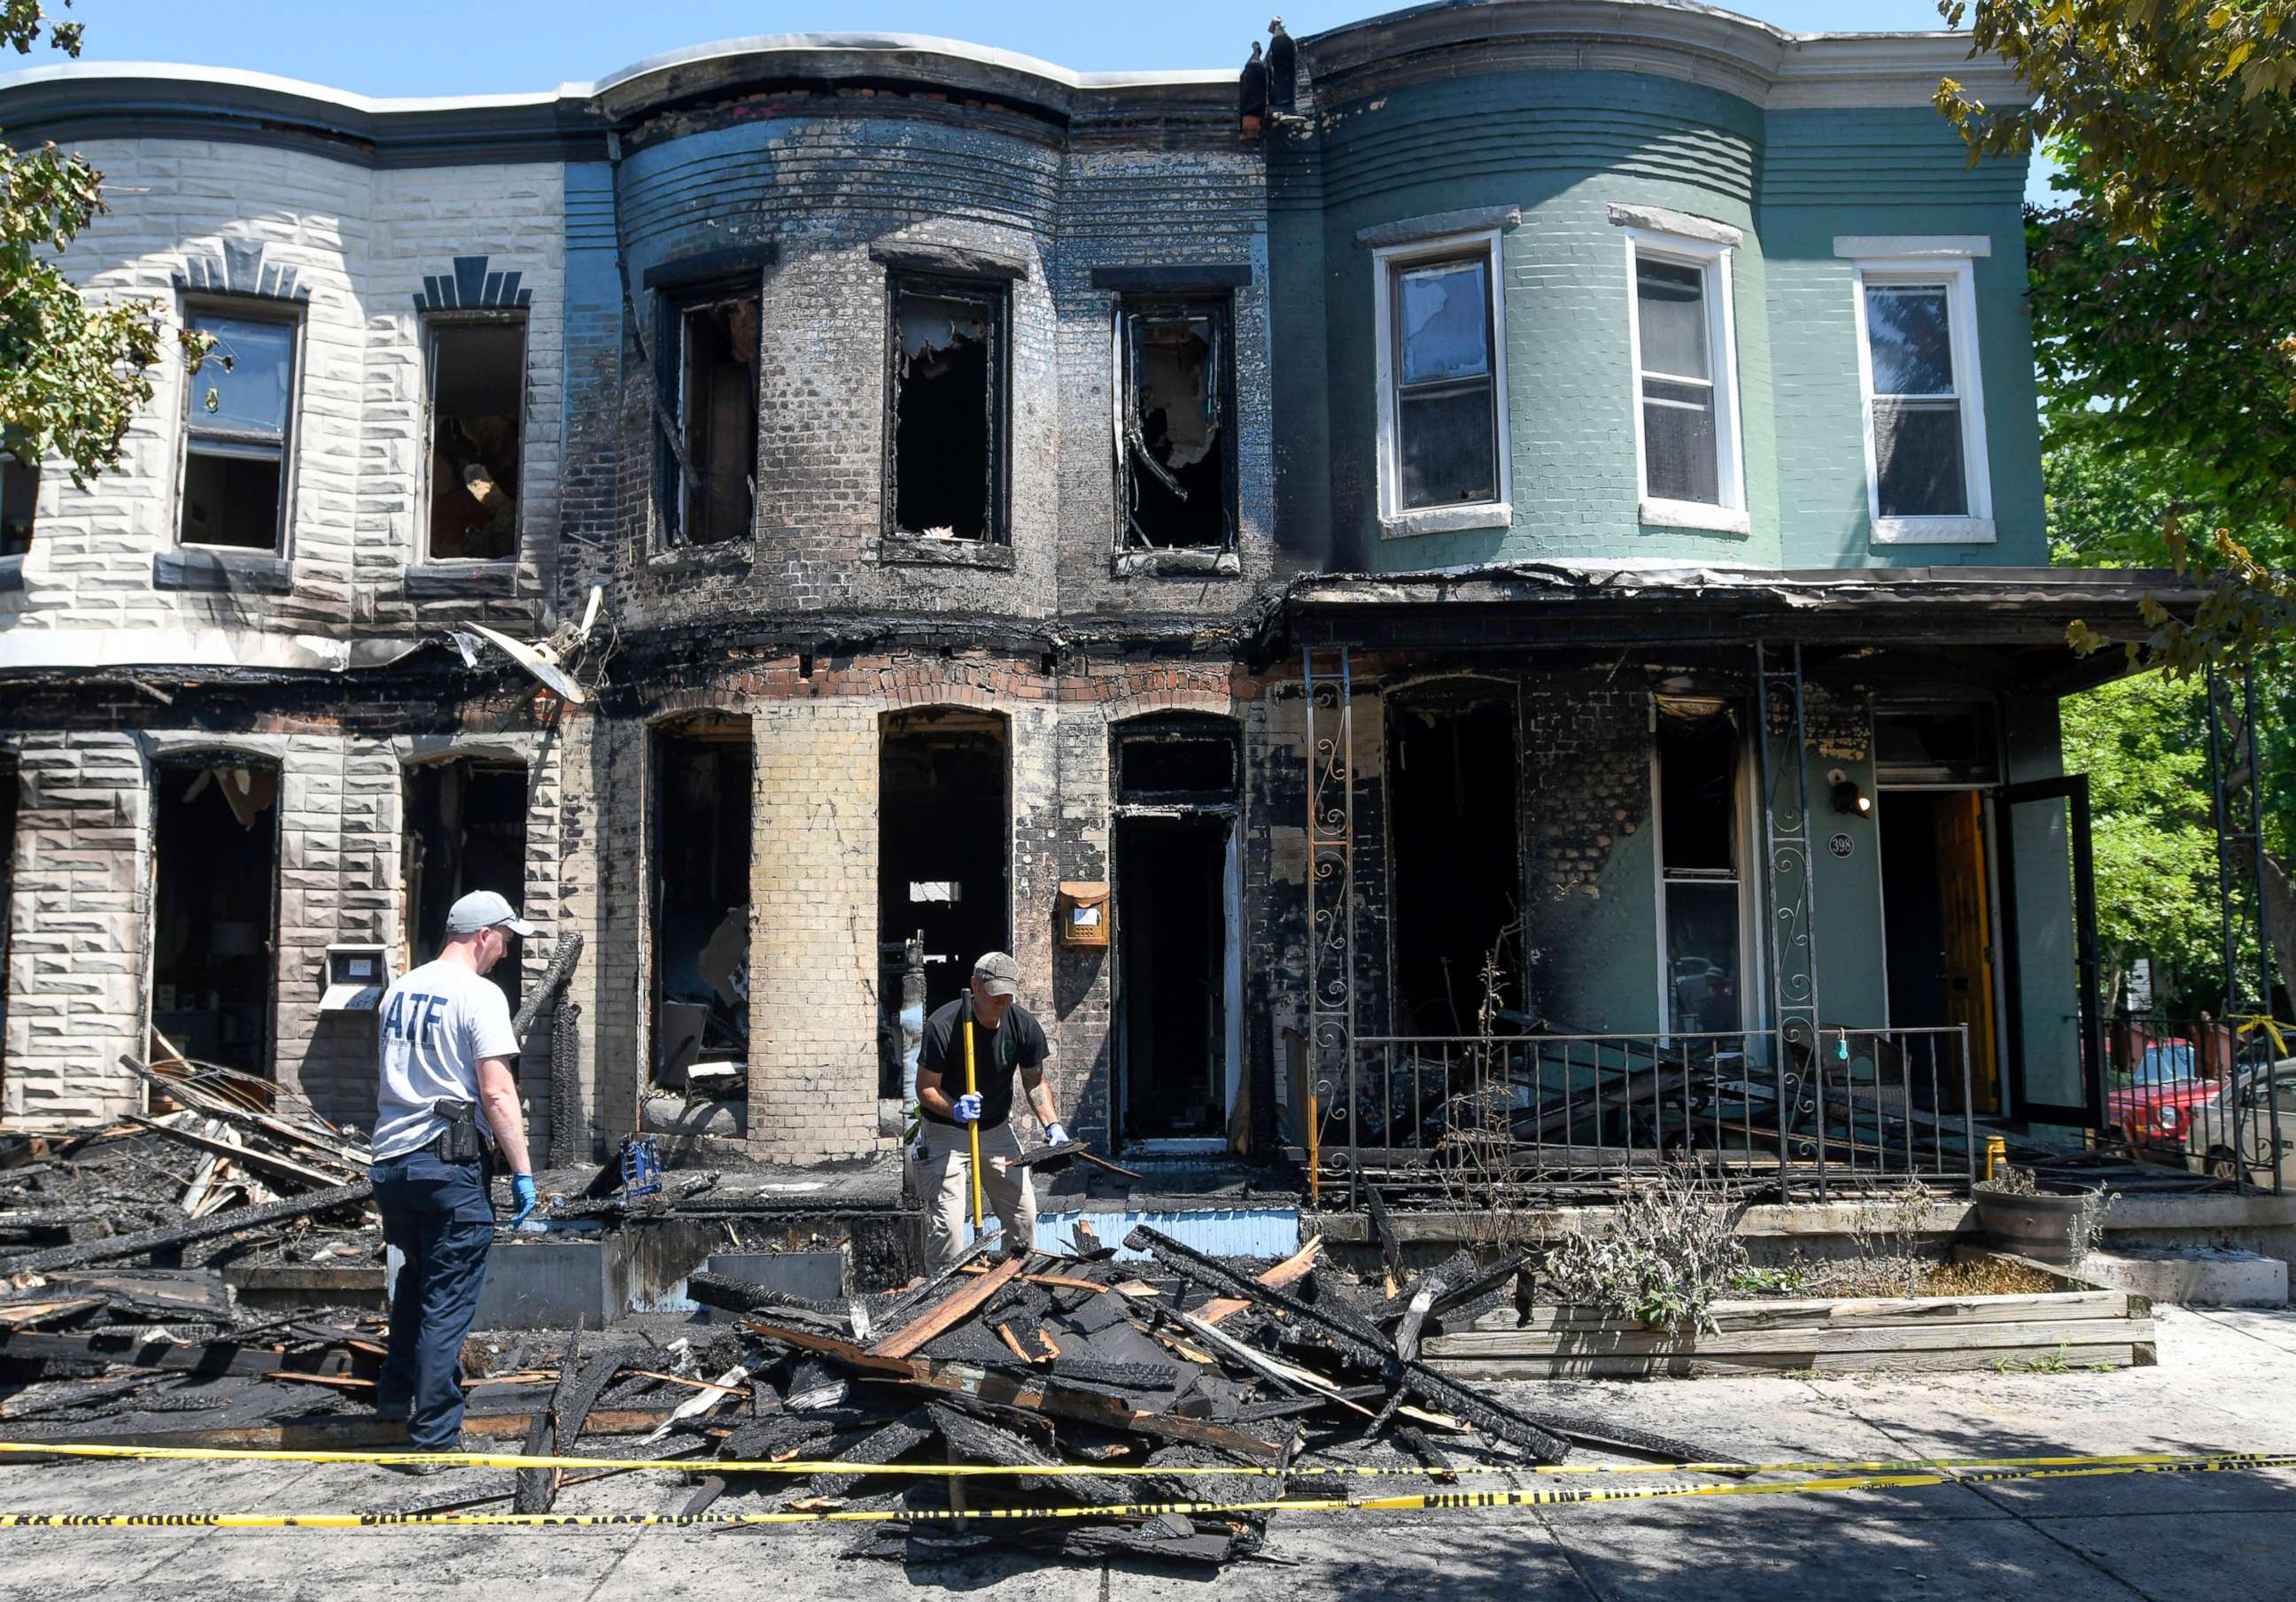 PHOTO: Fire investigators work at the scene of a row house fire in Baltimore, on June 15, 2022.